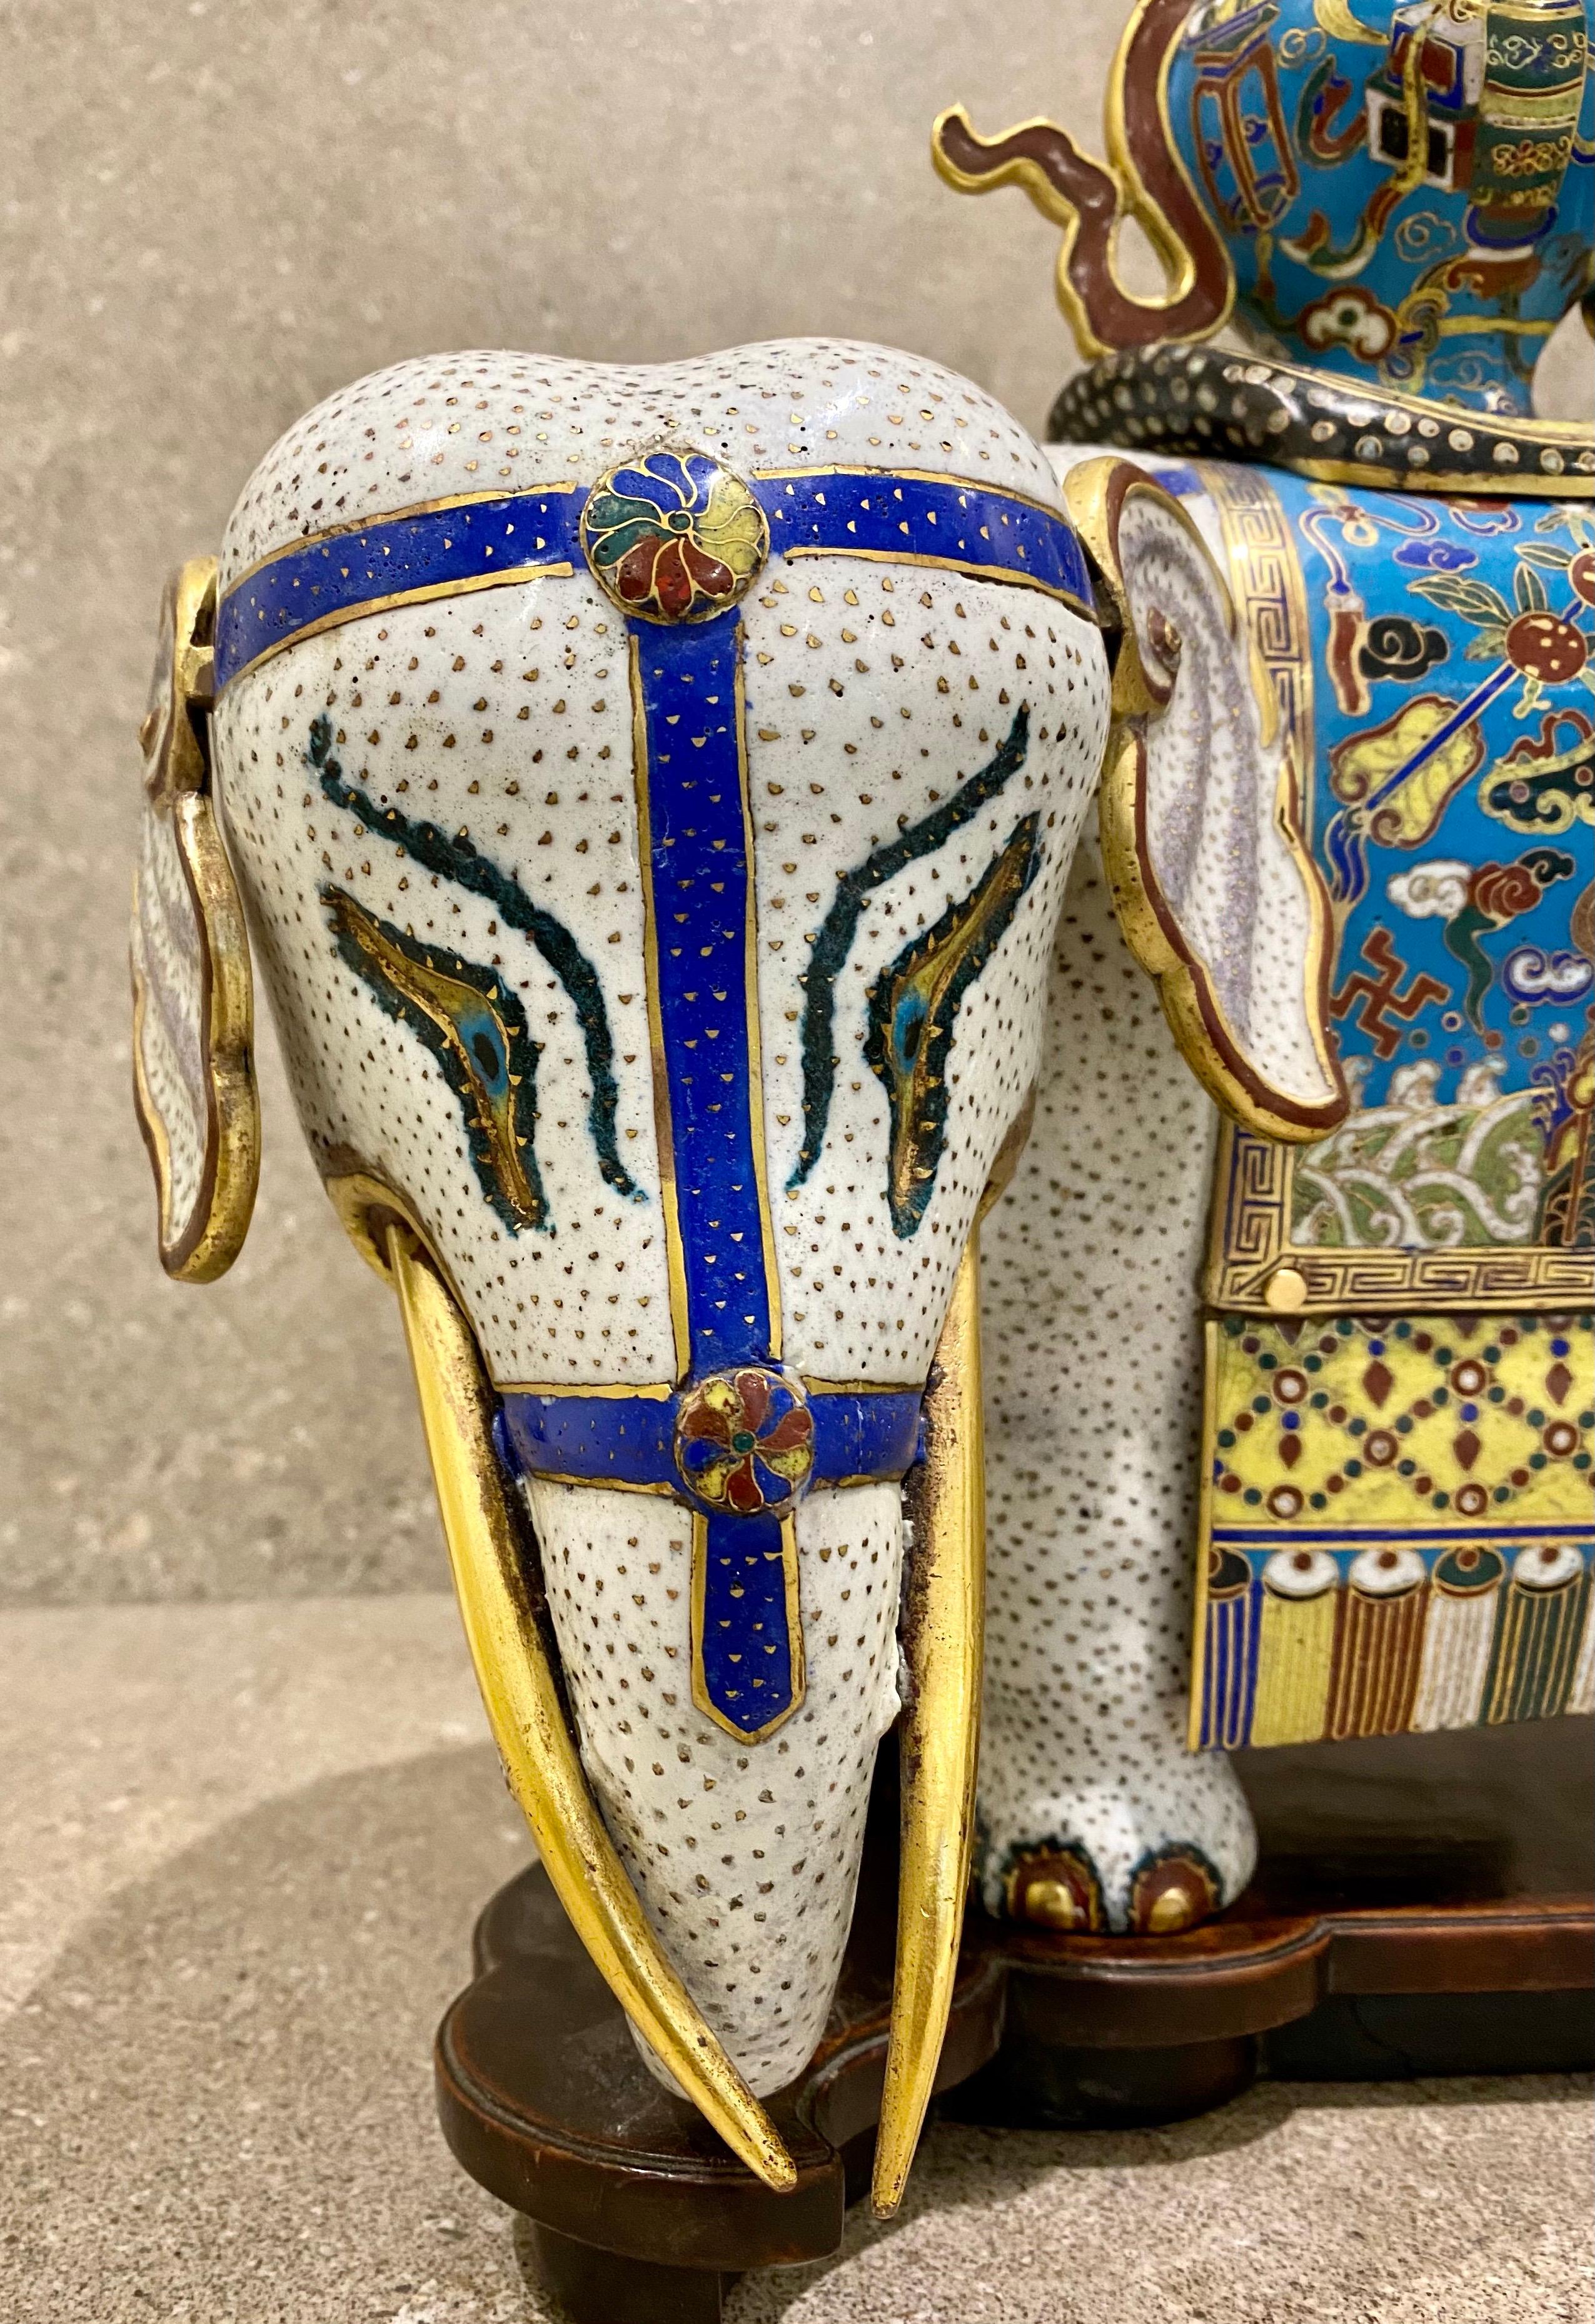 18th Century Chinese Jiaqing Period Cloisonne Model of an Elephant